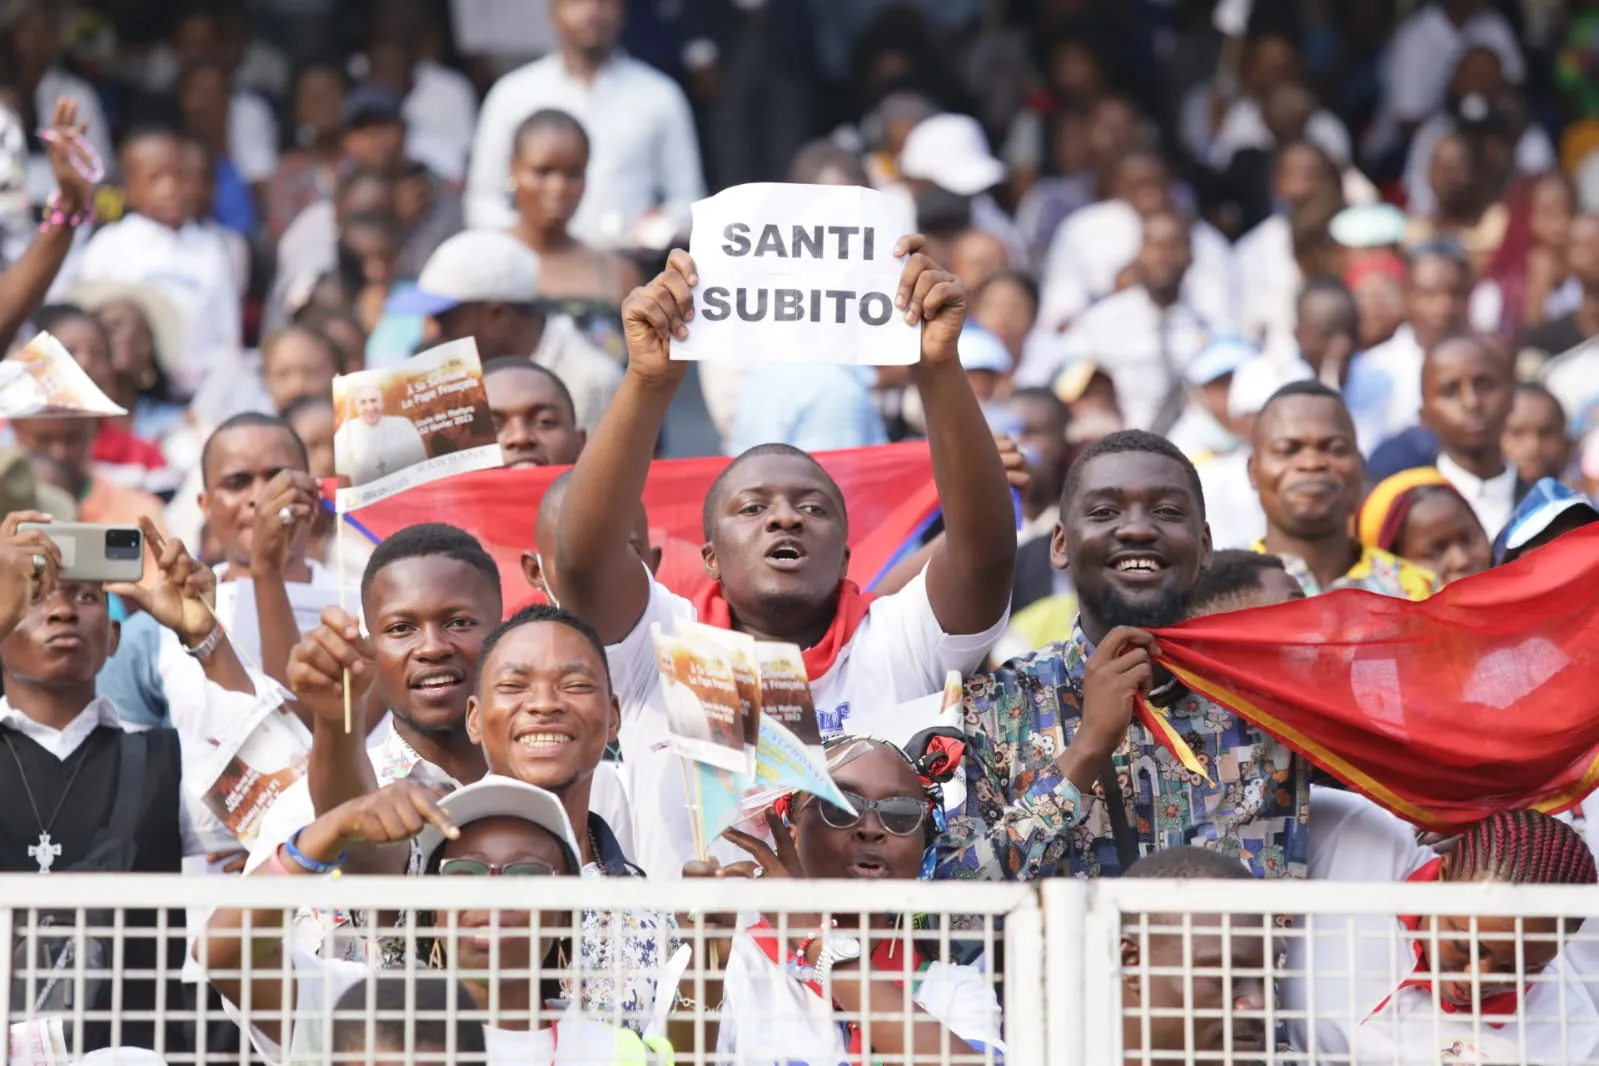 A spectator at Martyrs' Stadium in Kinshasa, DRC, on Feb. 2, 2023, holds a sign with the phrase "santi subito" in reference to two Congolese blesseds. Elias Turk/CNA